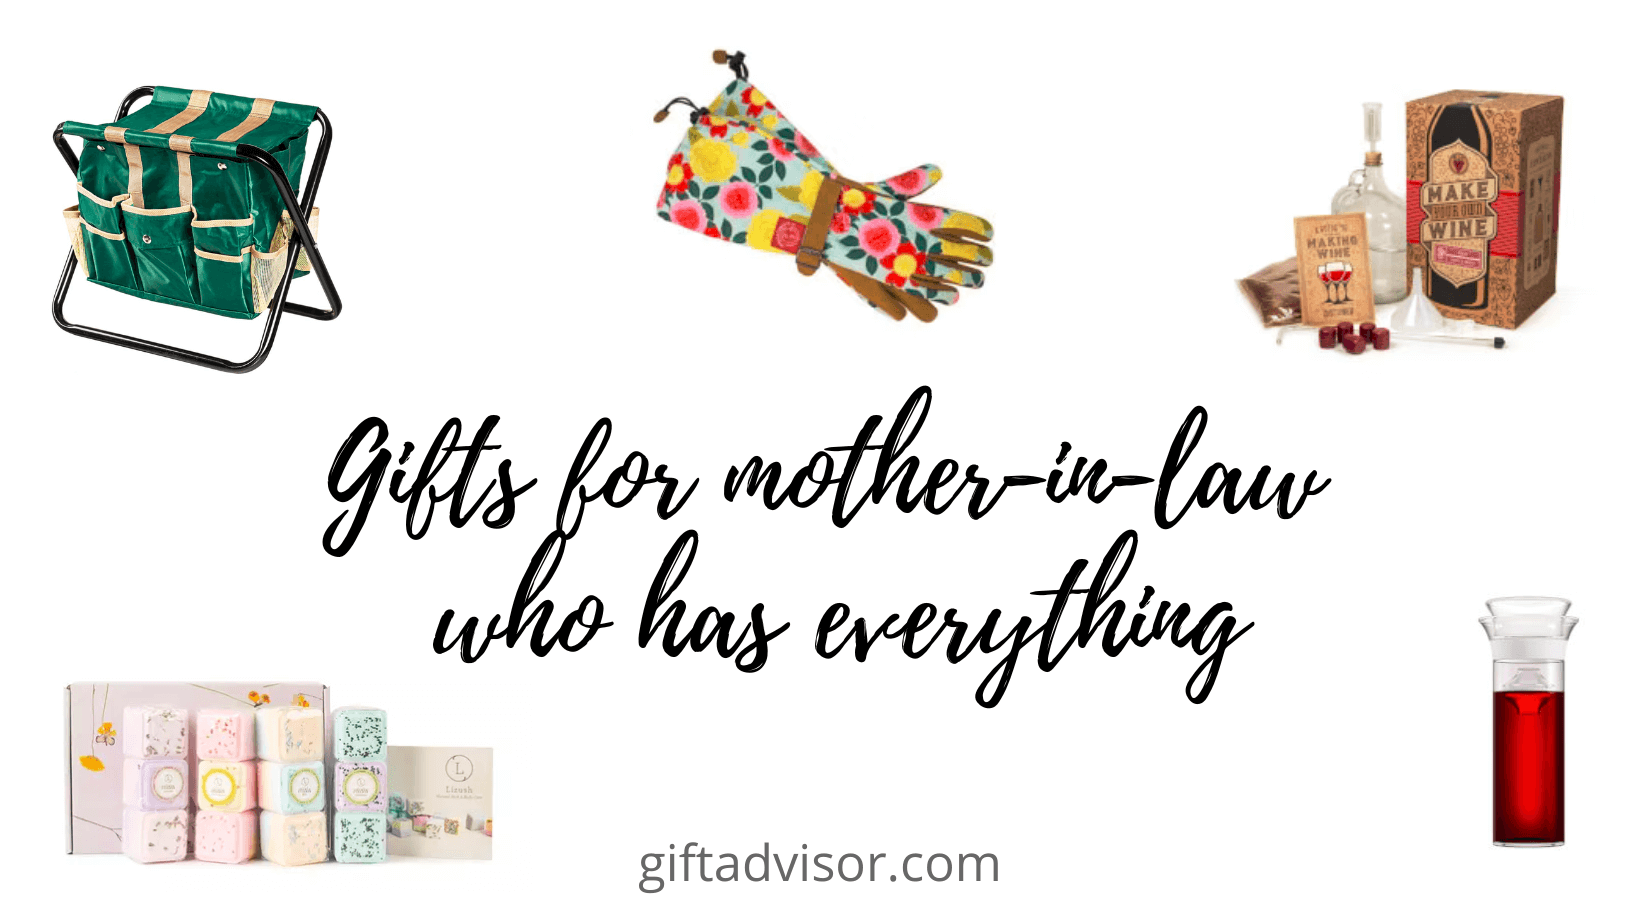 Gifts for Mother-In-Law Who Has Everything